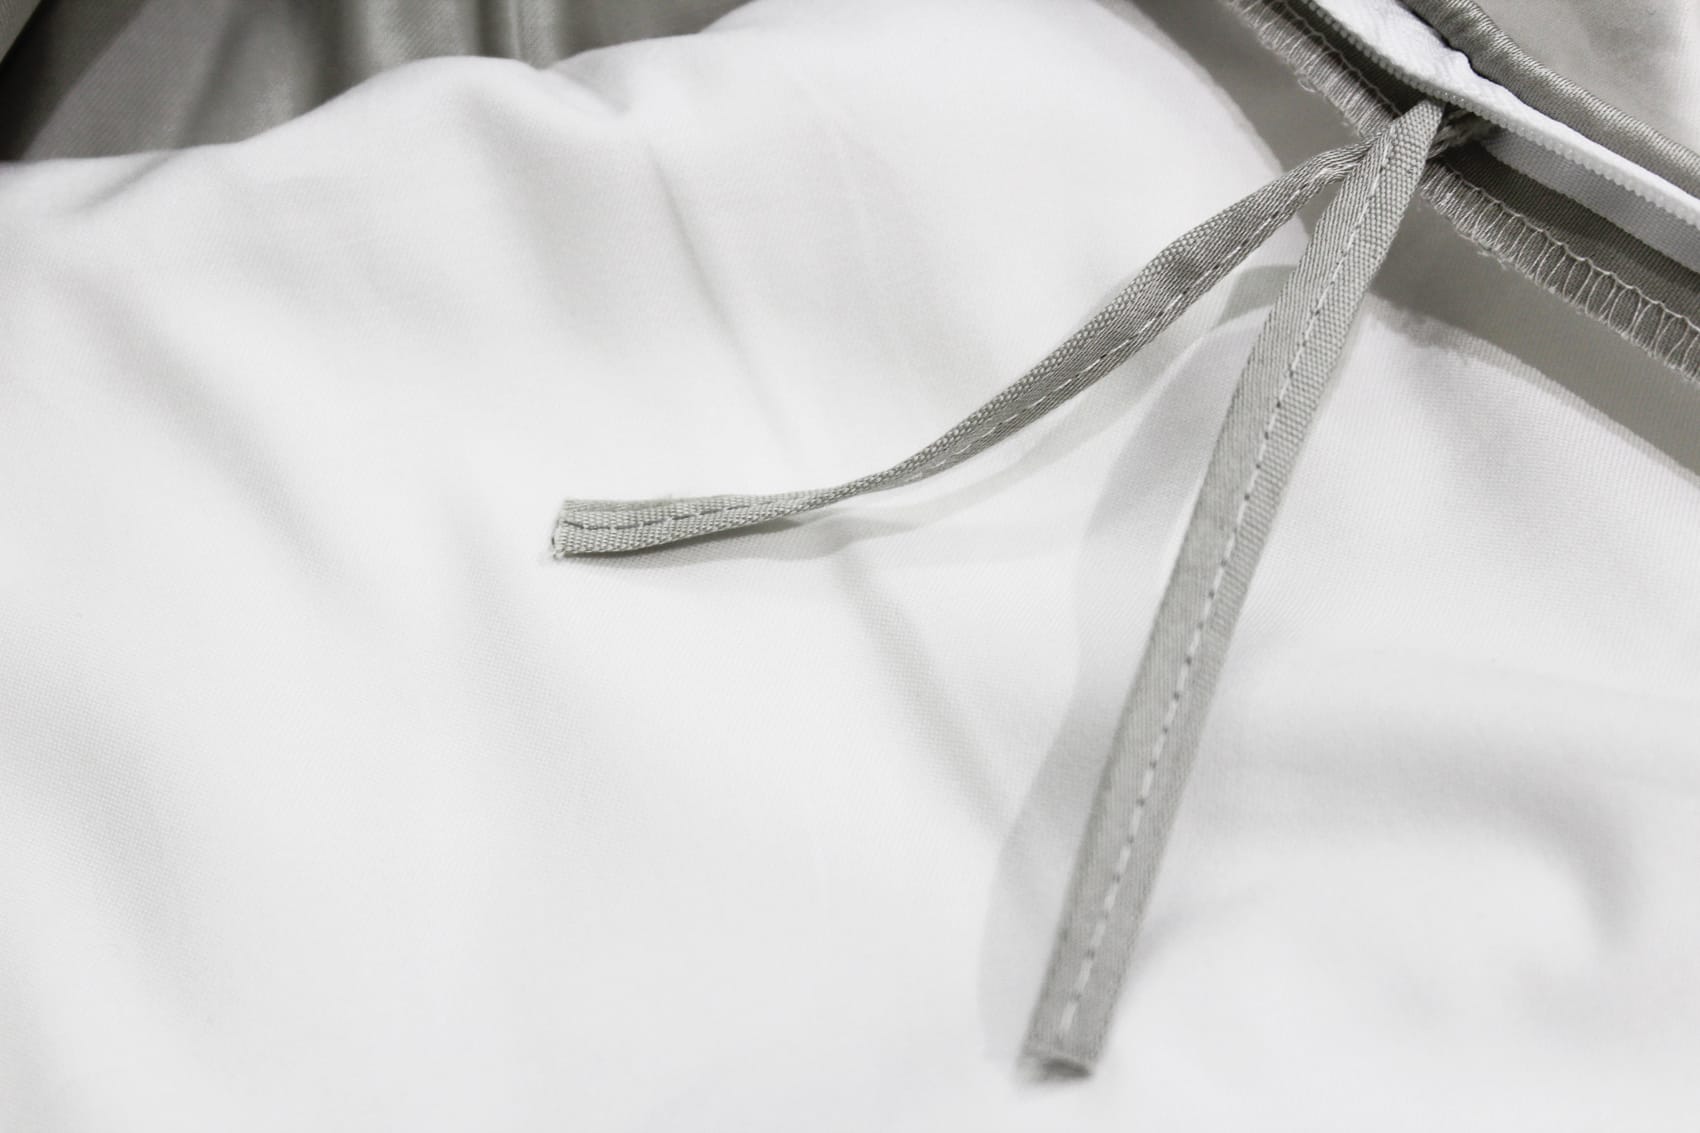 Plain 400 TC Luxurious Cotton Satin Duvet Cover in Silver and white online in India